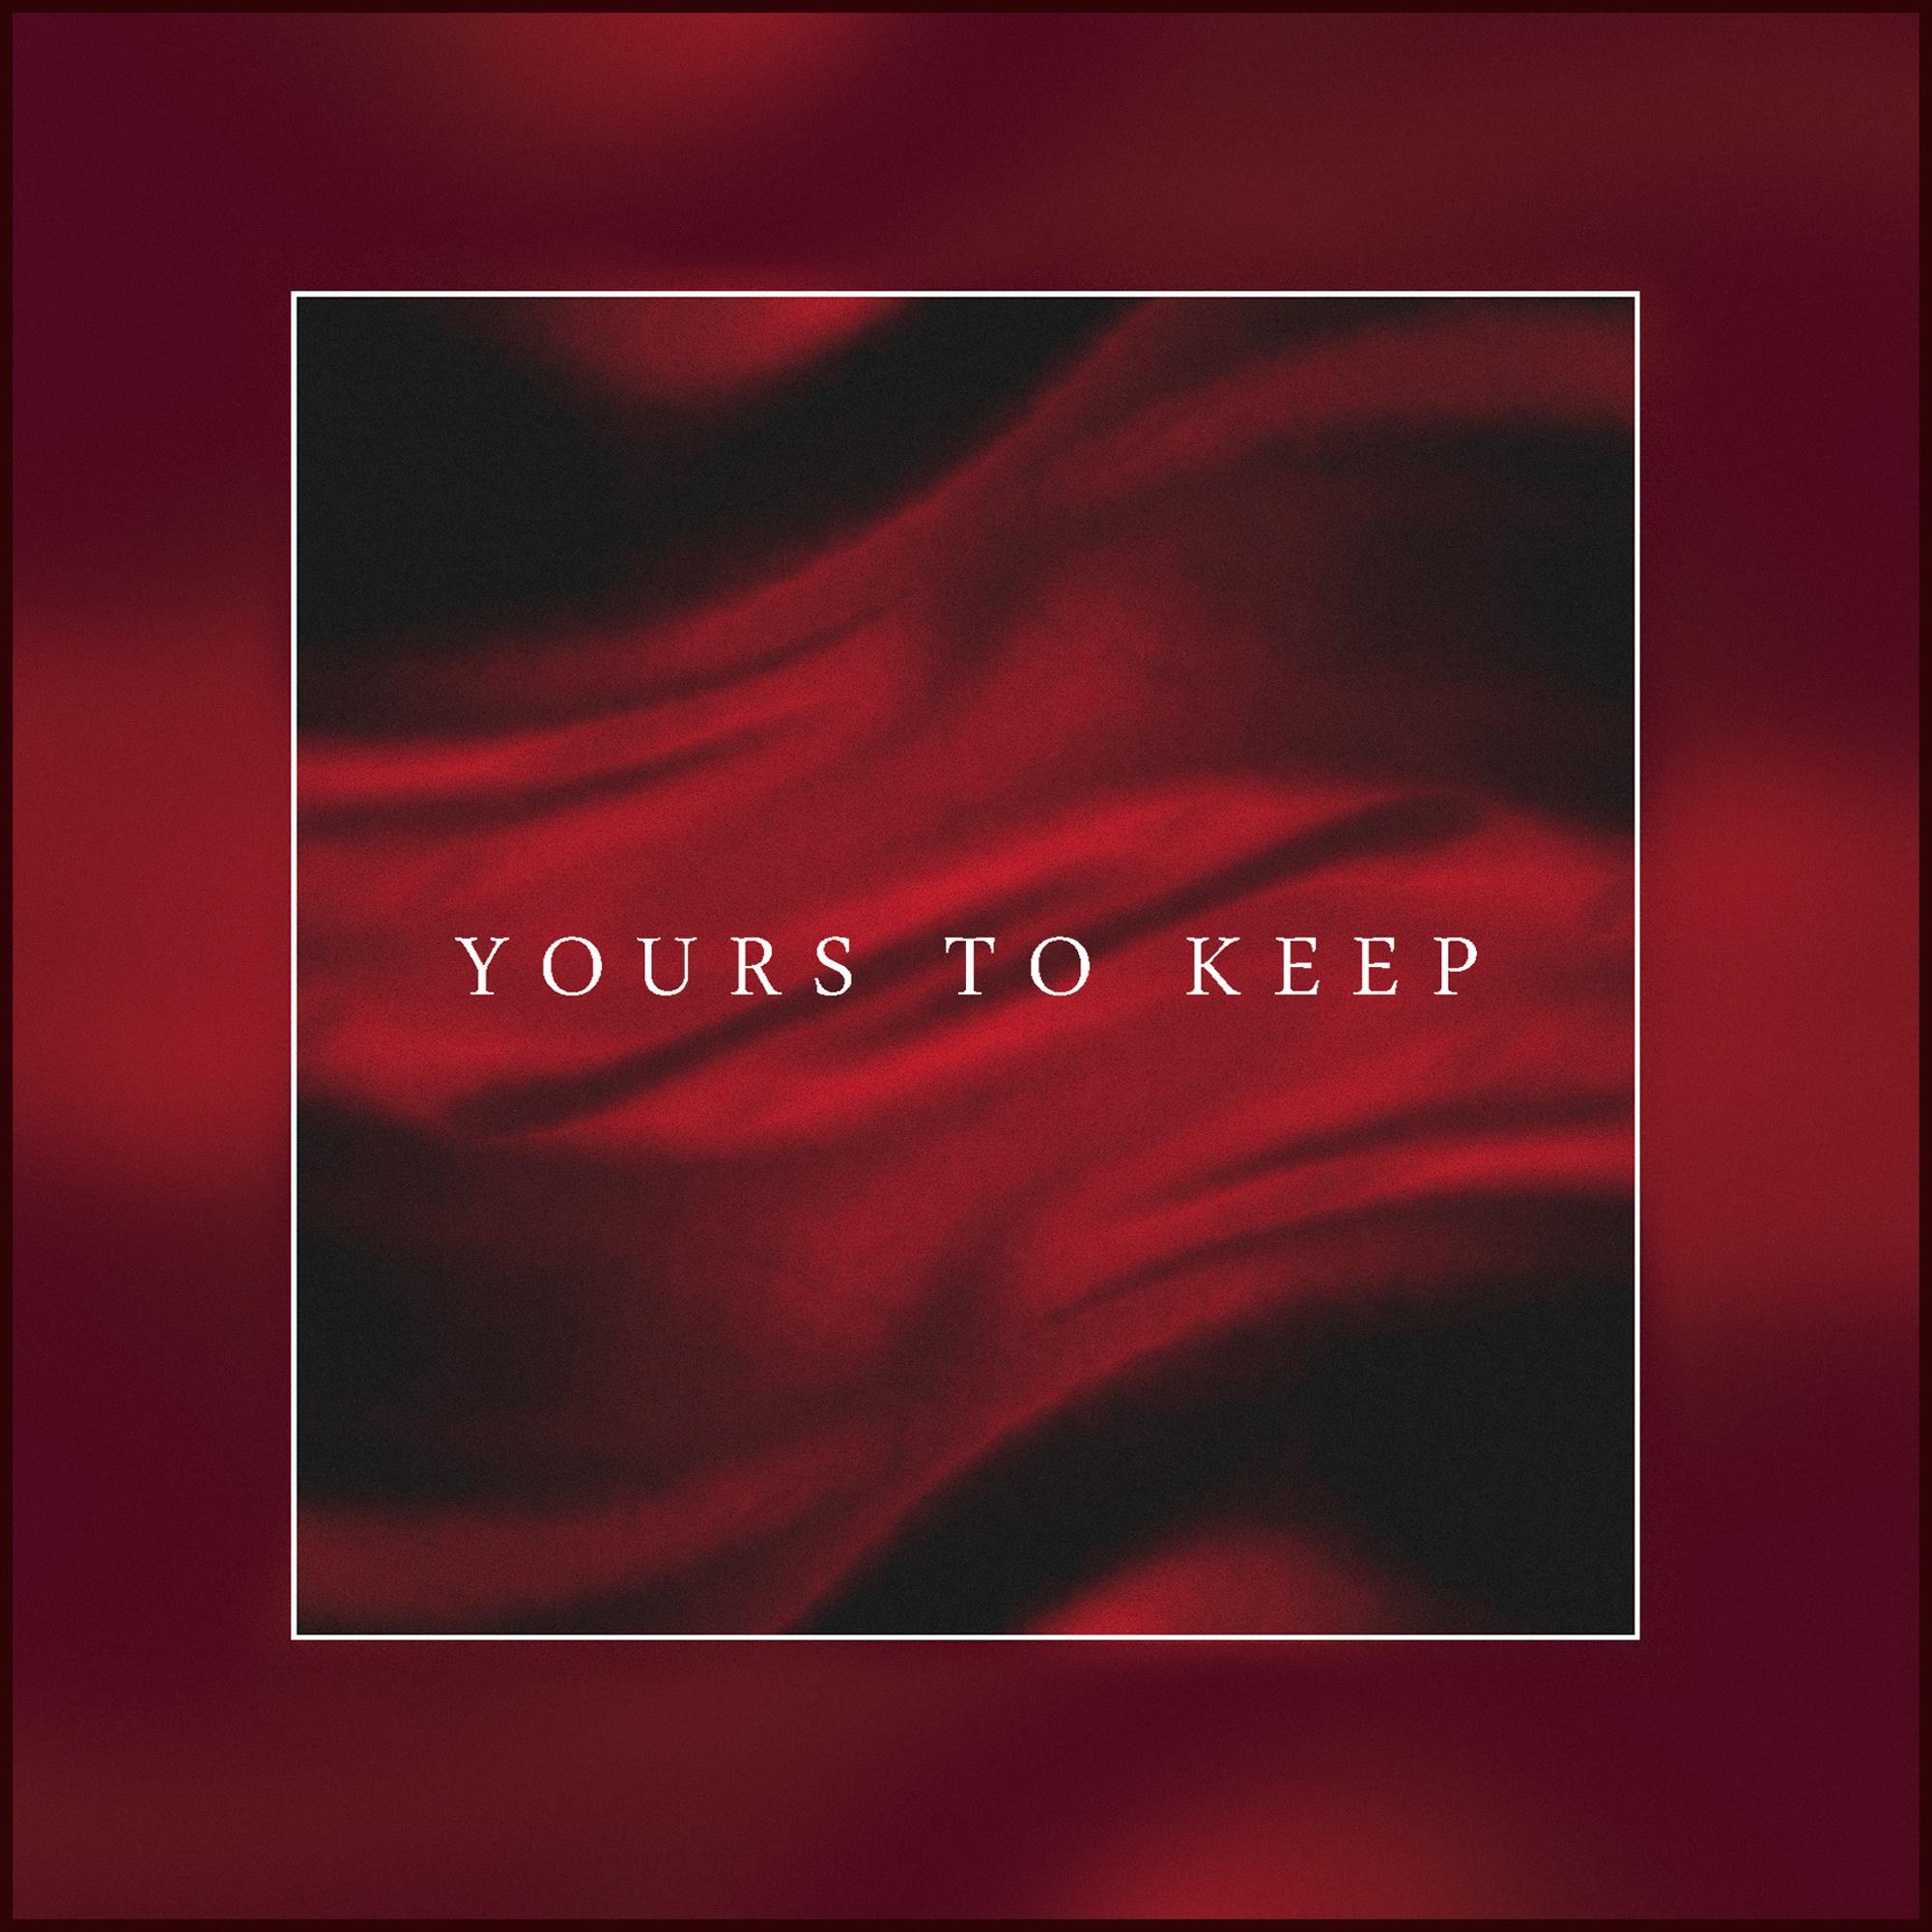 Yours To Keep